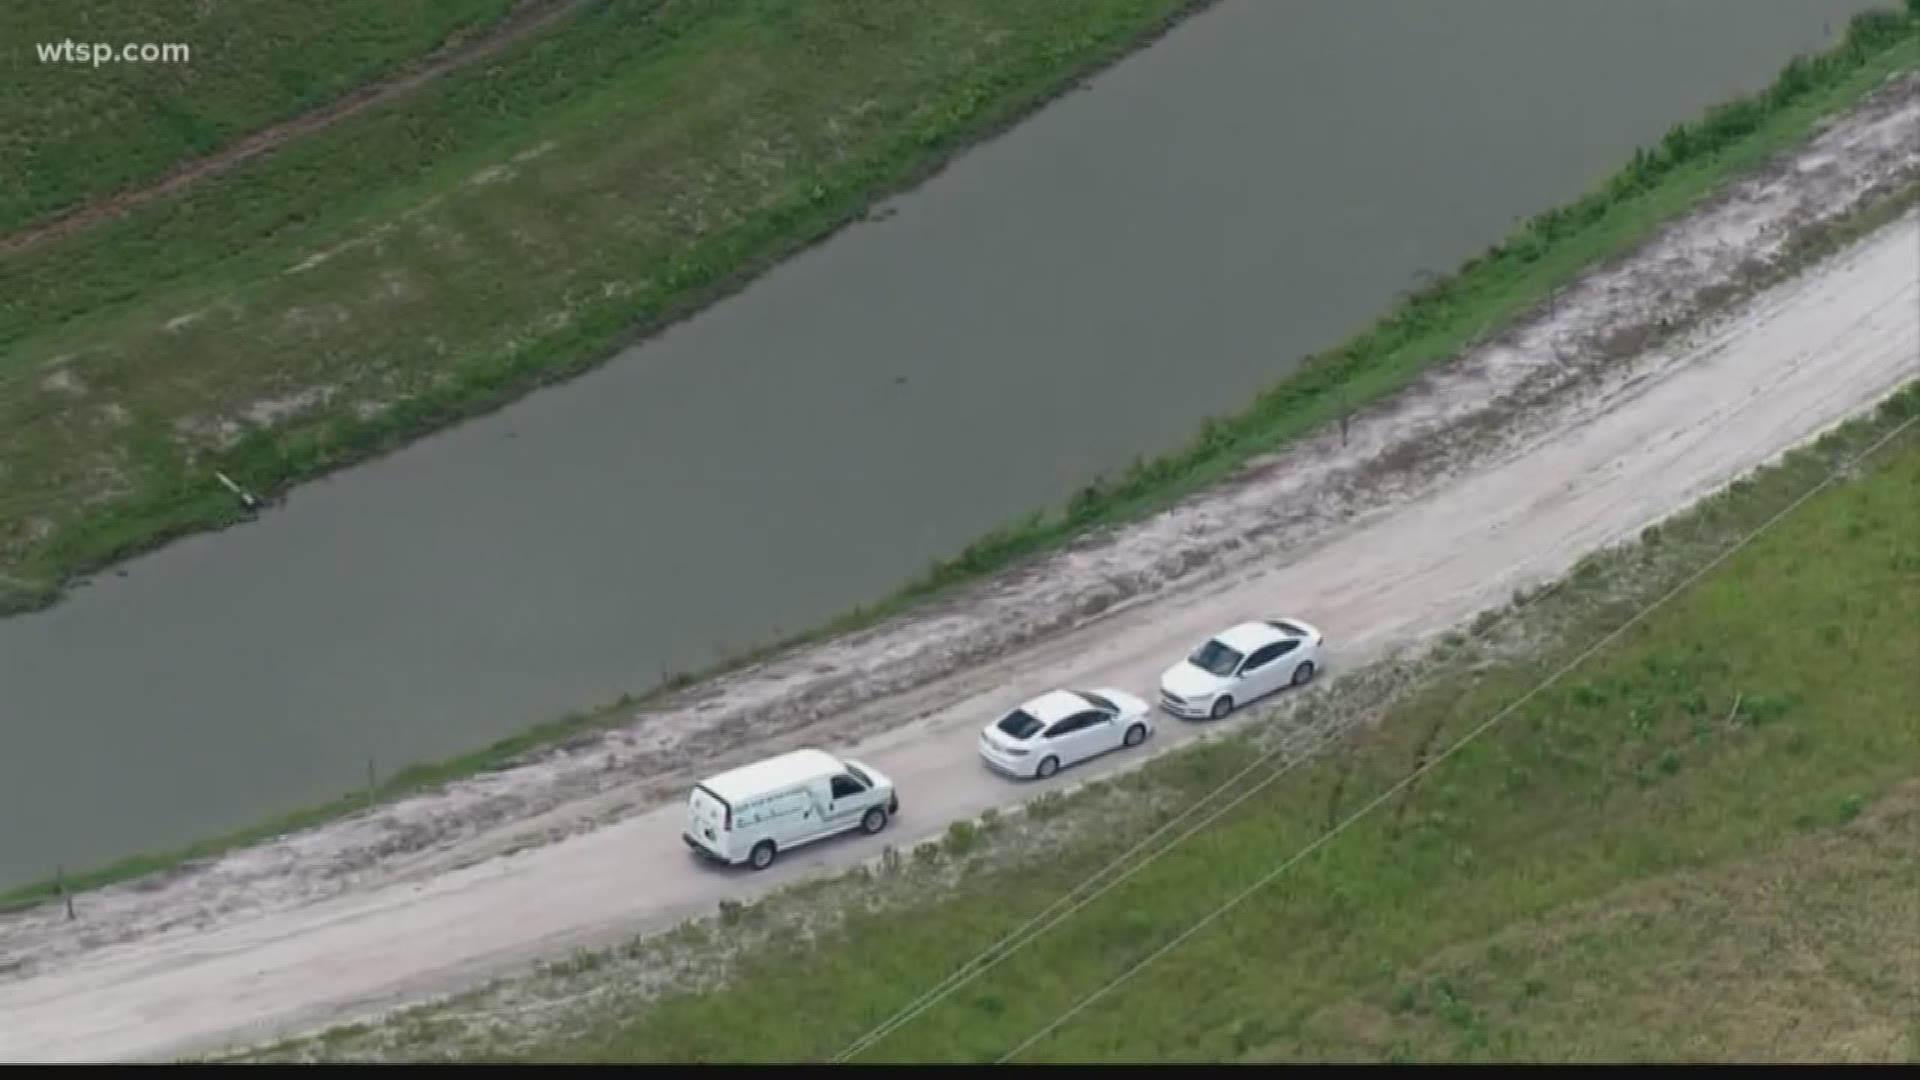 A human body was found in the water near an alligator on Thursday just off Peeples Road near County Road 630 in Polk County.

The Polk County Sheriff's Office says the remains of a deceased man were pulled from a canal on the property of The Mosaic Company, which does mining along Highway 630 -- just west of Fort Meade. An employee doing inspections discovered the man's body.